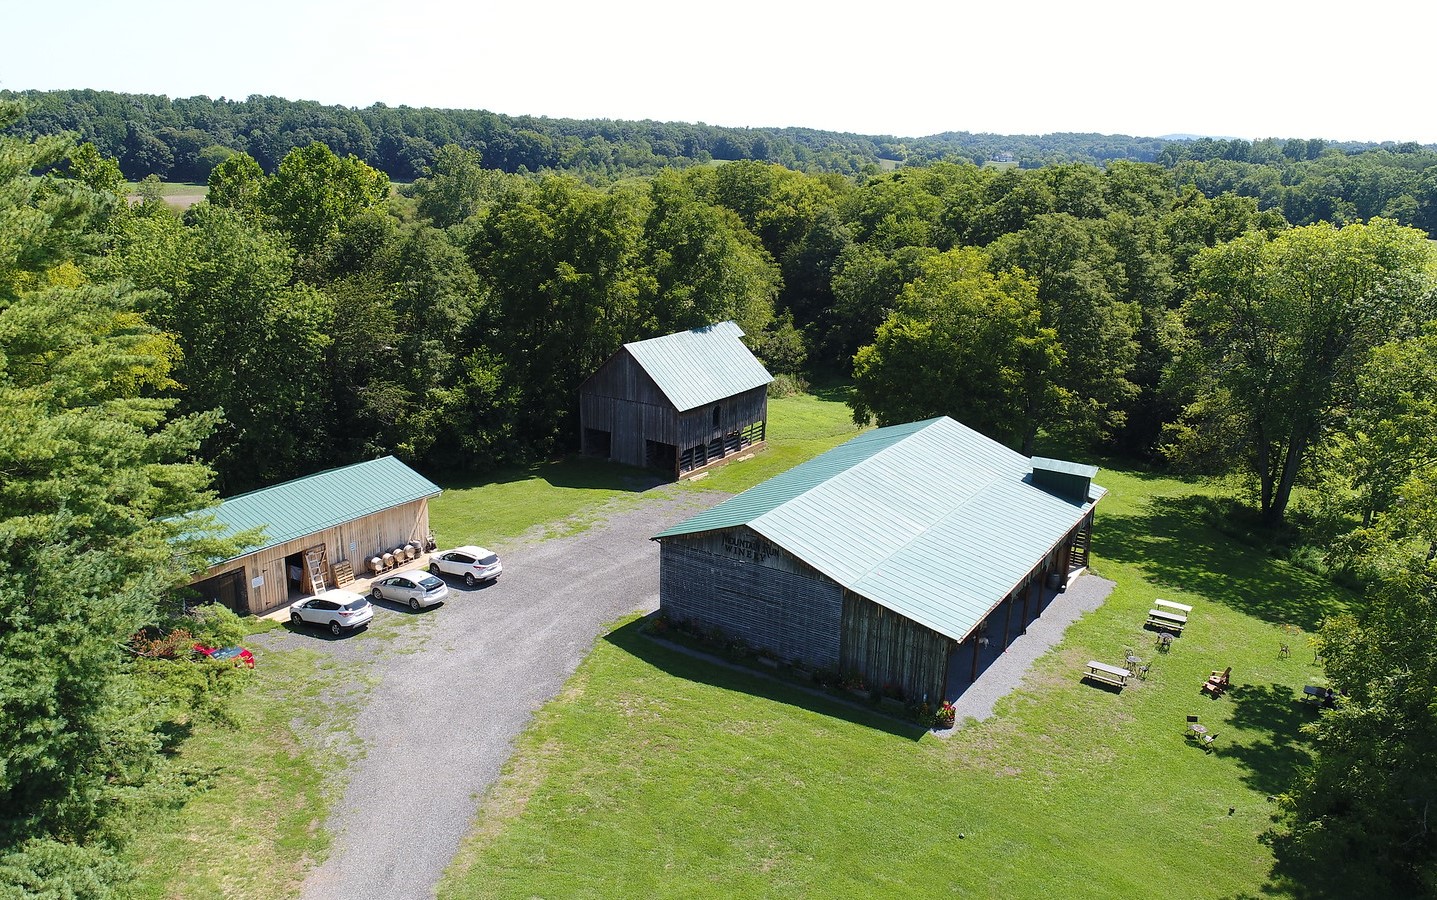 Mountain Run Winery is centered around a trio of old barns on the property